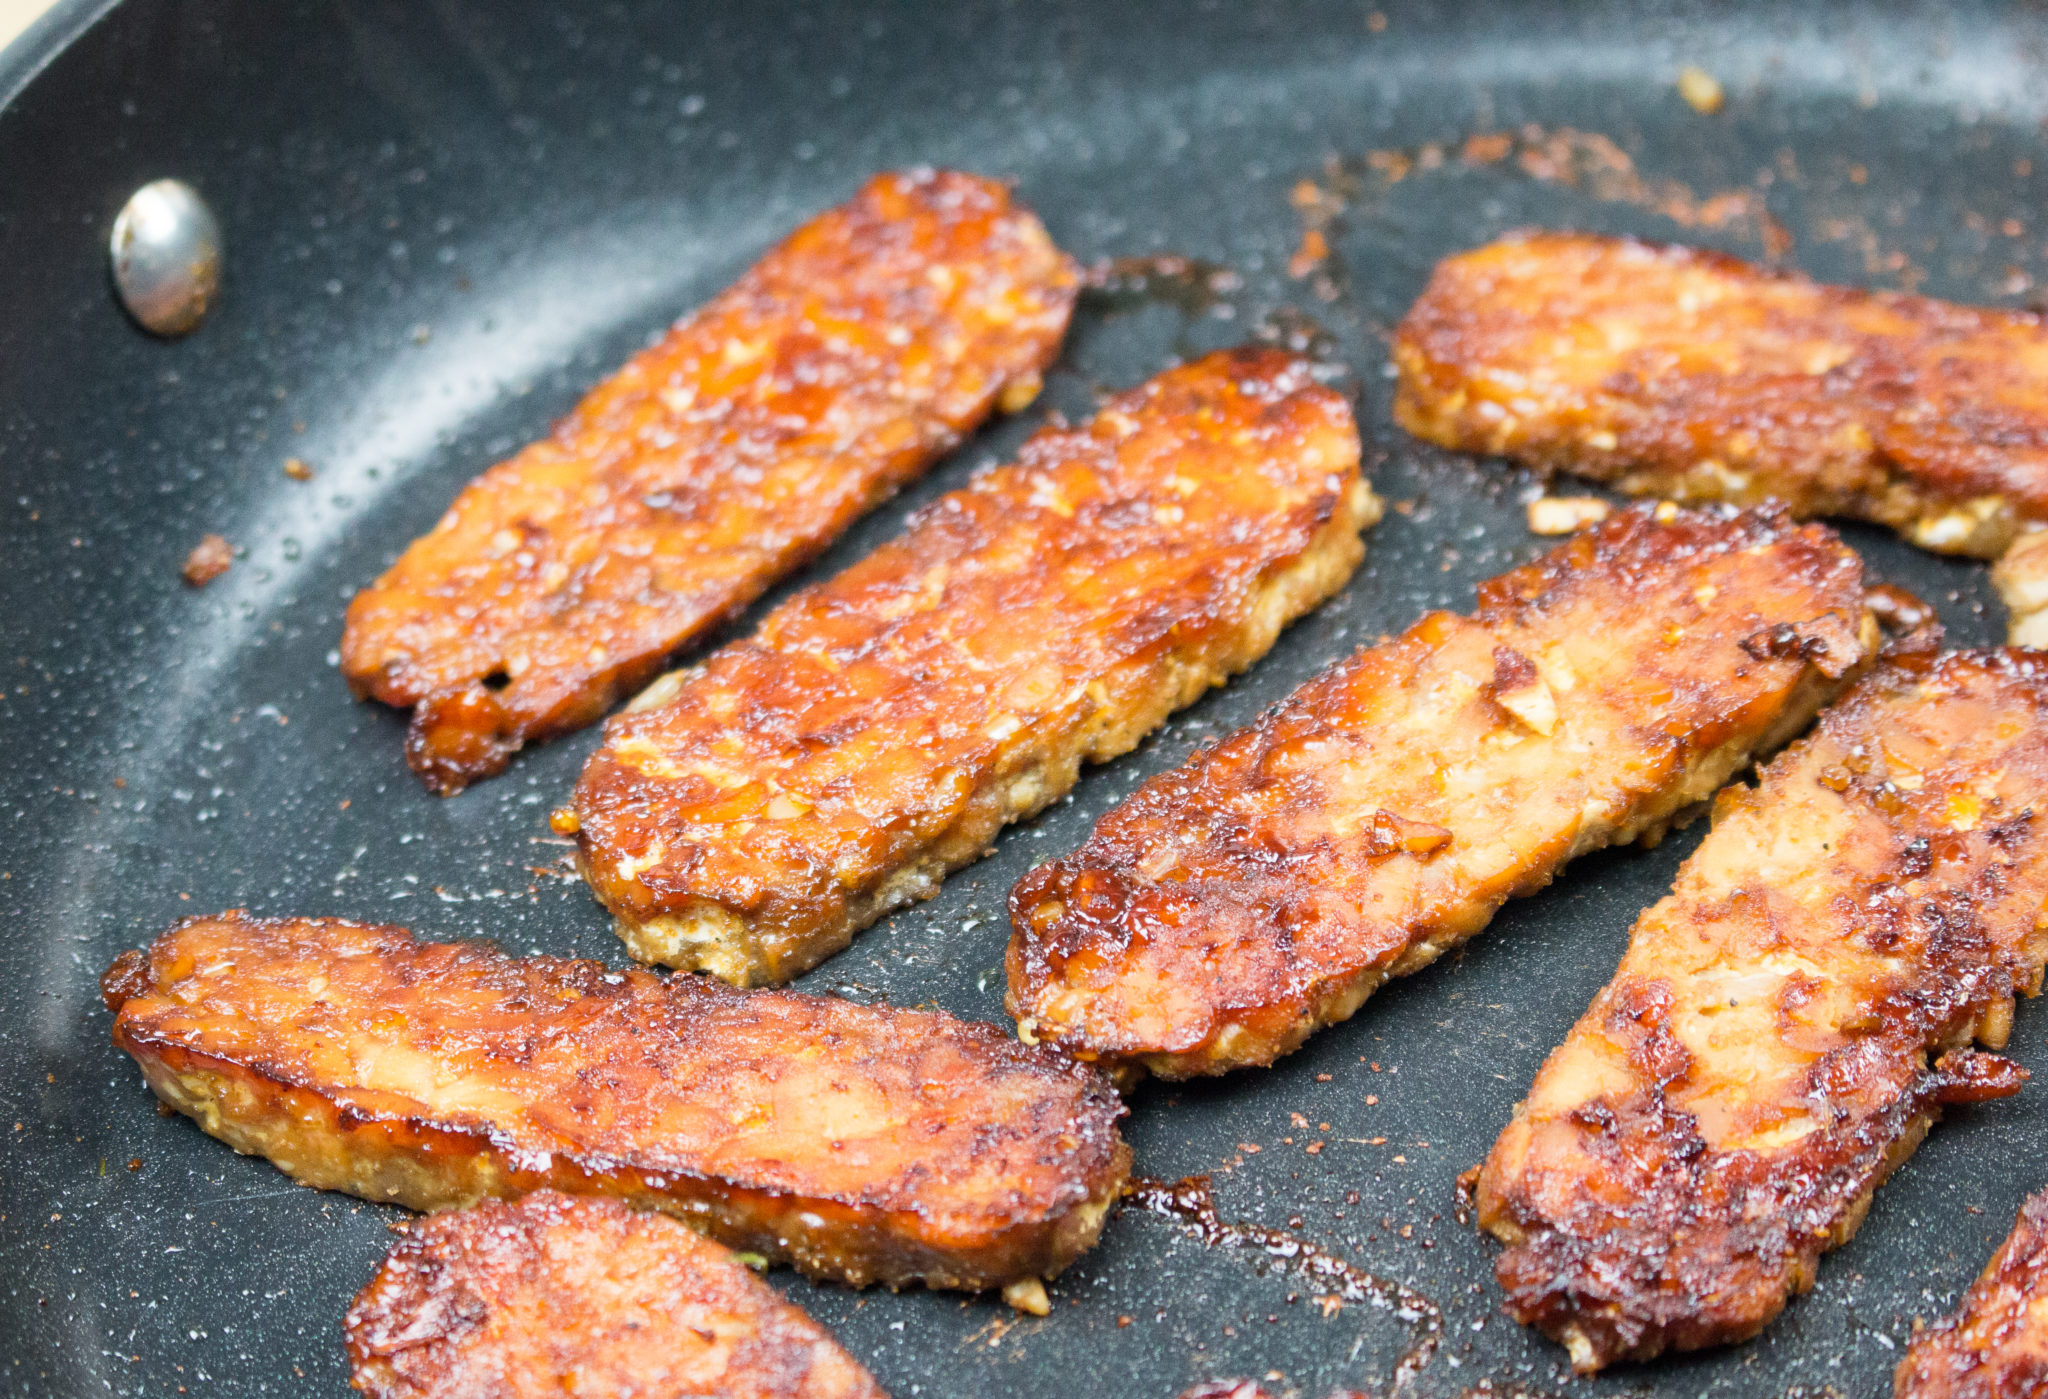 Tempeh bacon is a cinch to make, bold flavors, versatile, fun to eat, breakfast, lunch, dinner or a delicious snack. www.veganglutenfreelife.com/tempeh-bacon/